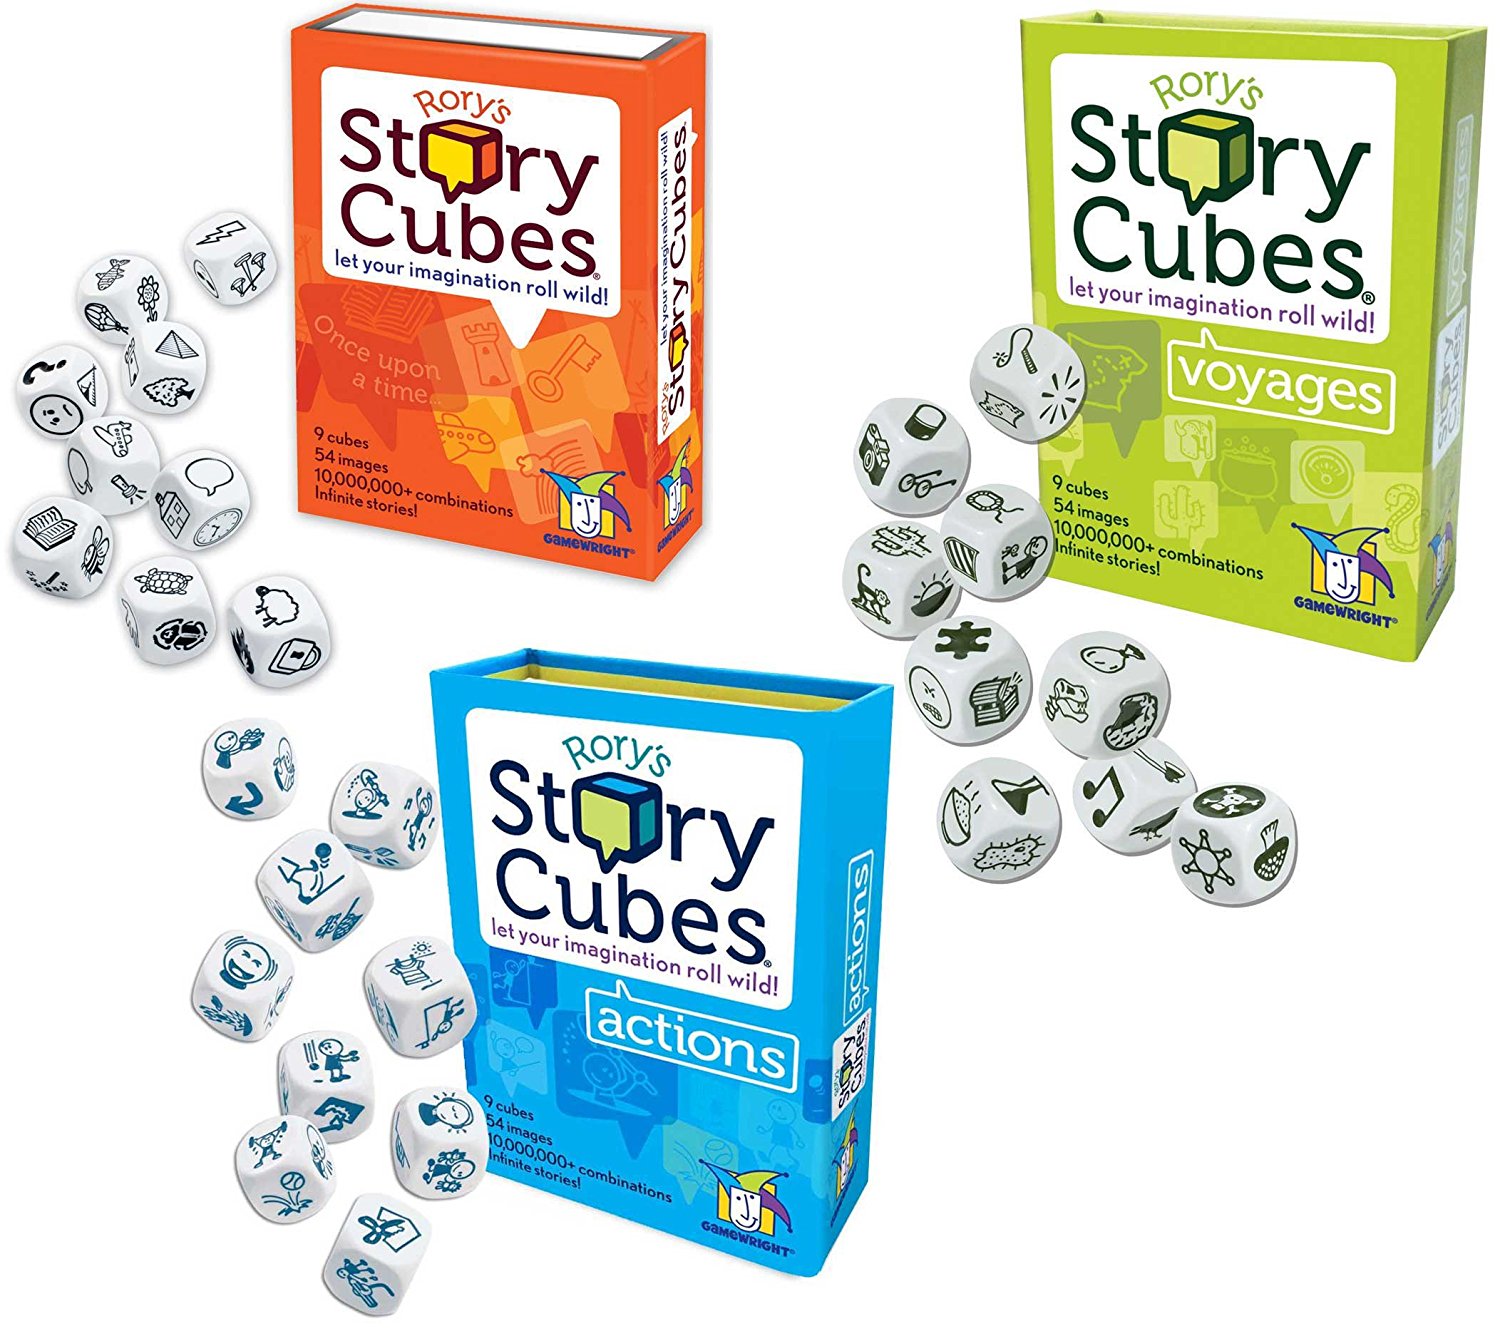 JUEGO COMPLETO DE CUENTOS RORY STORY CUBE COMPLETE ACTION VOGAYER